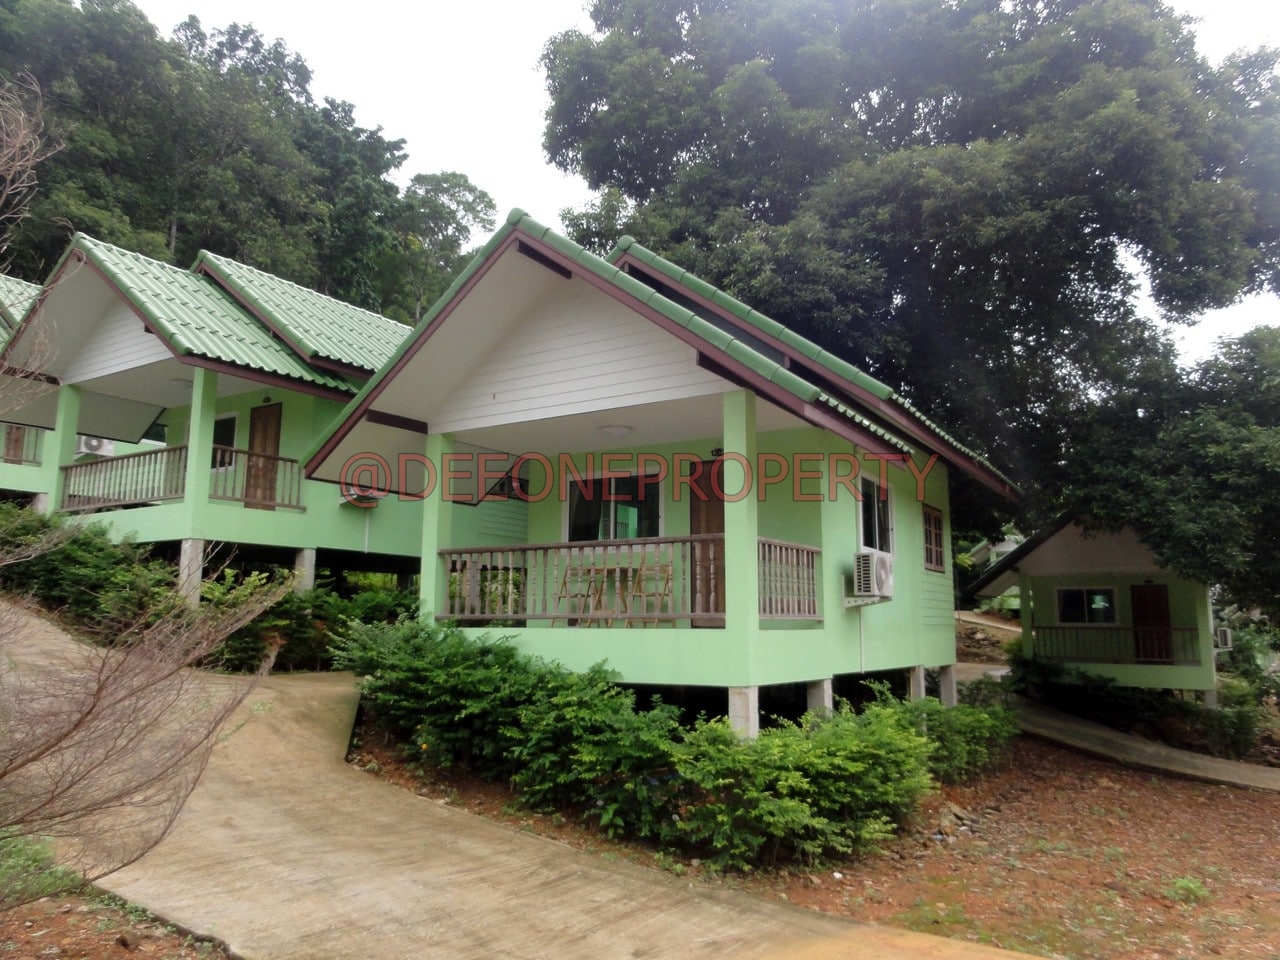 Green Bungalow for Rent – North West Coast, Koh Chang